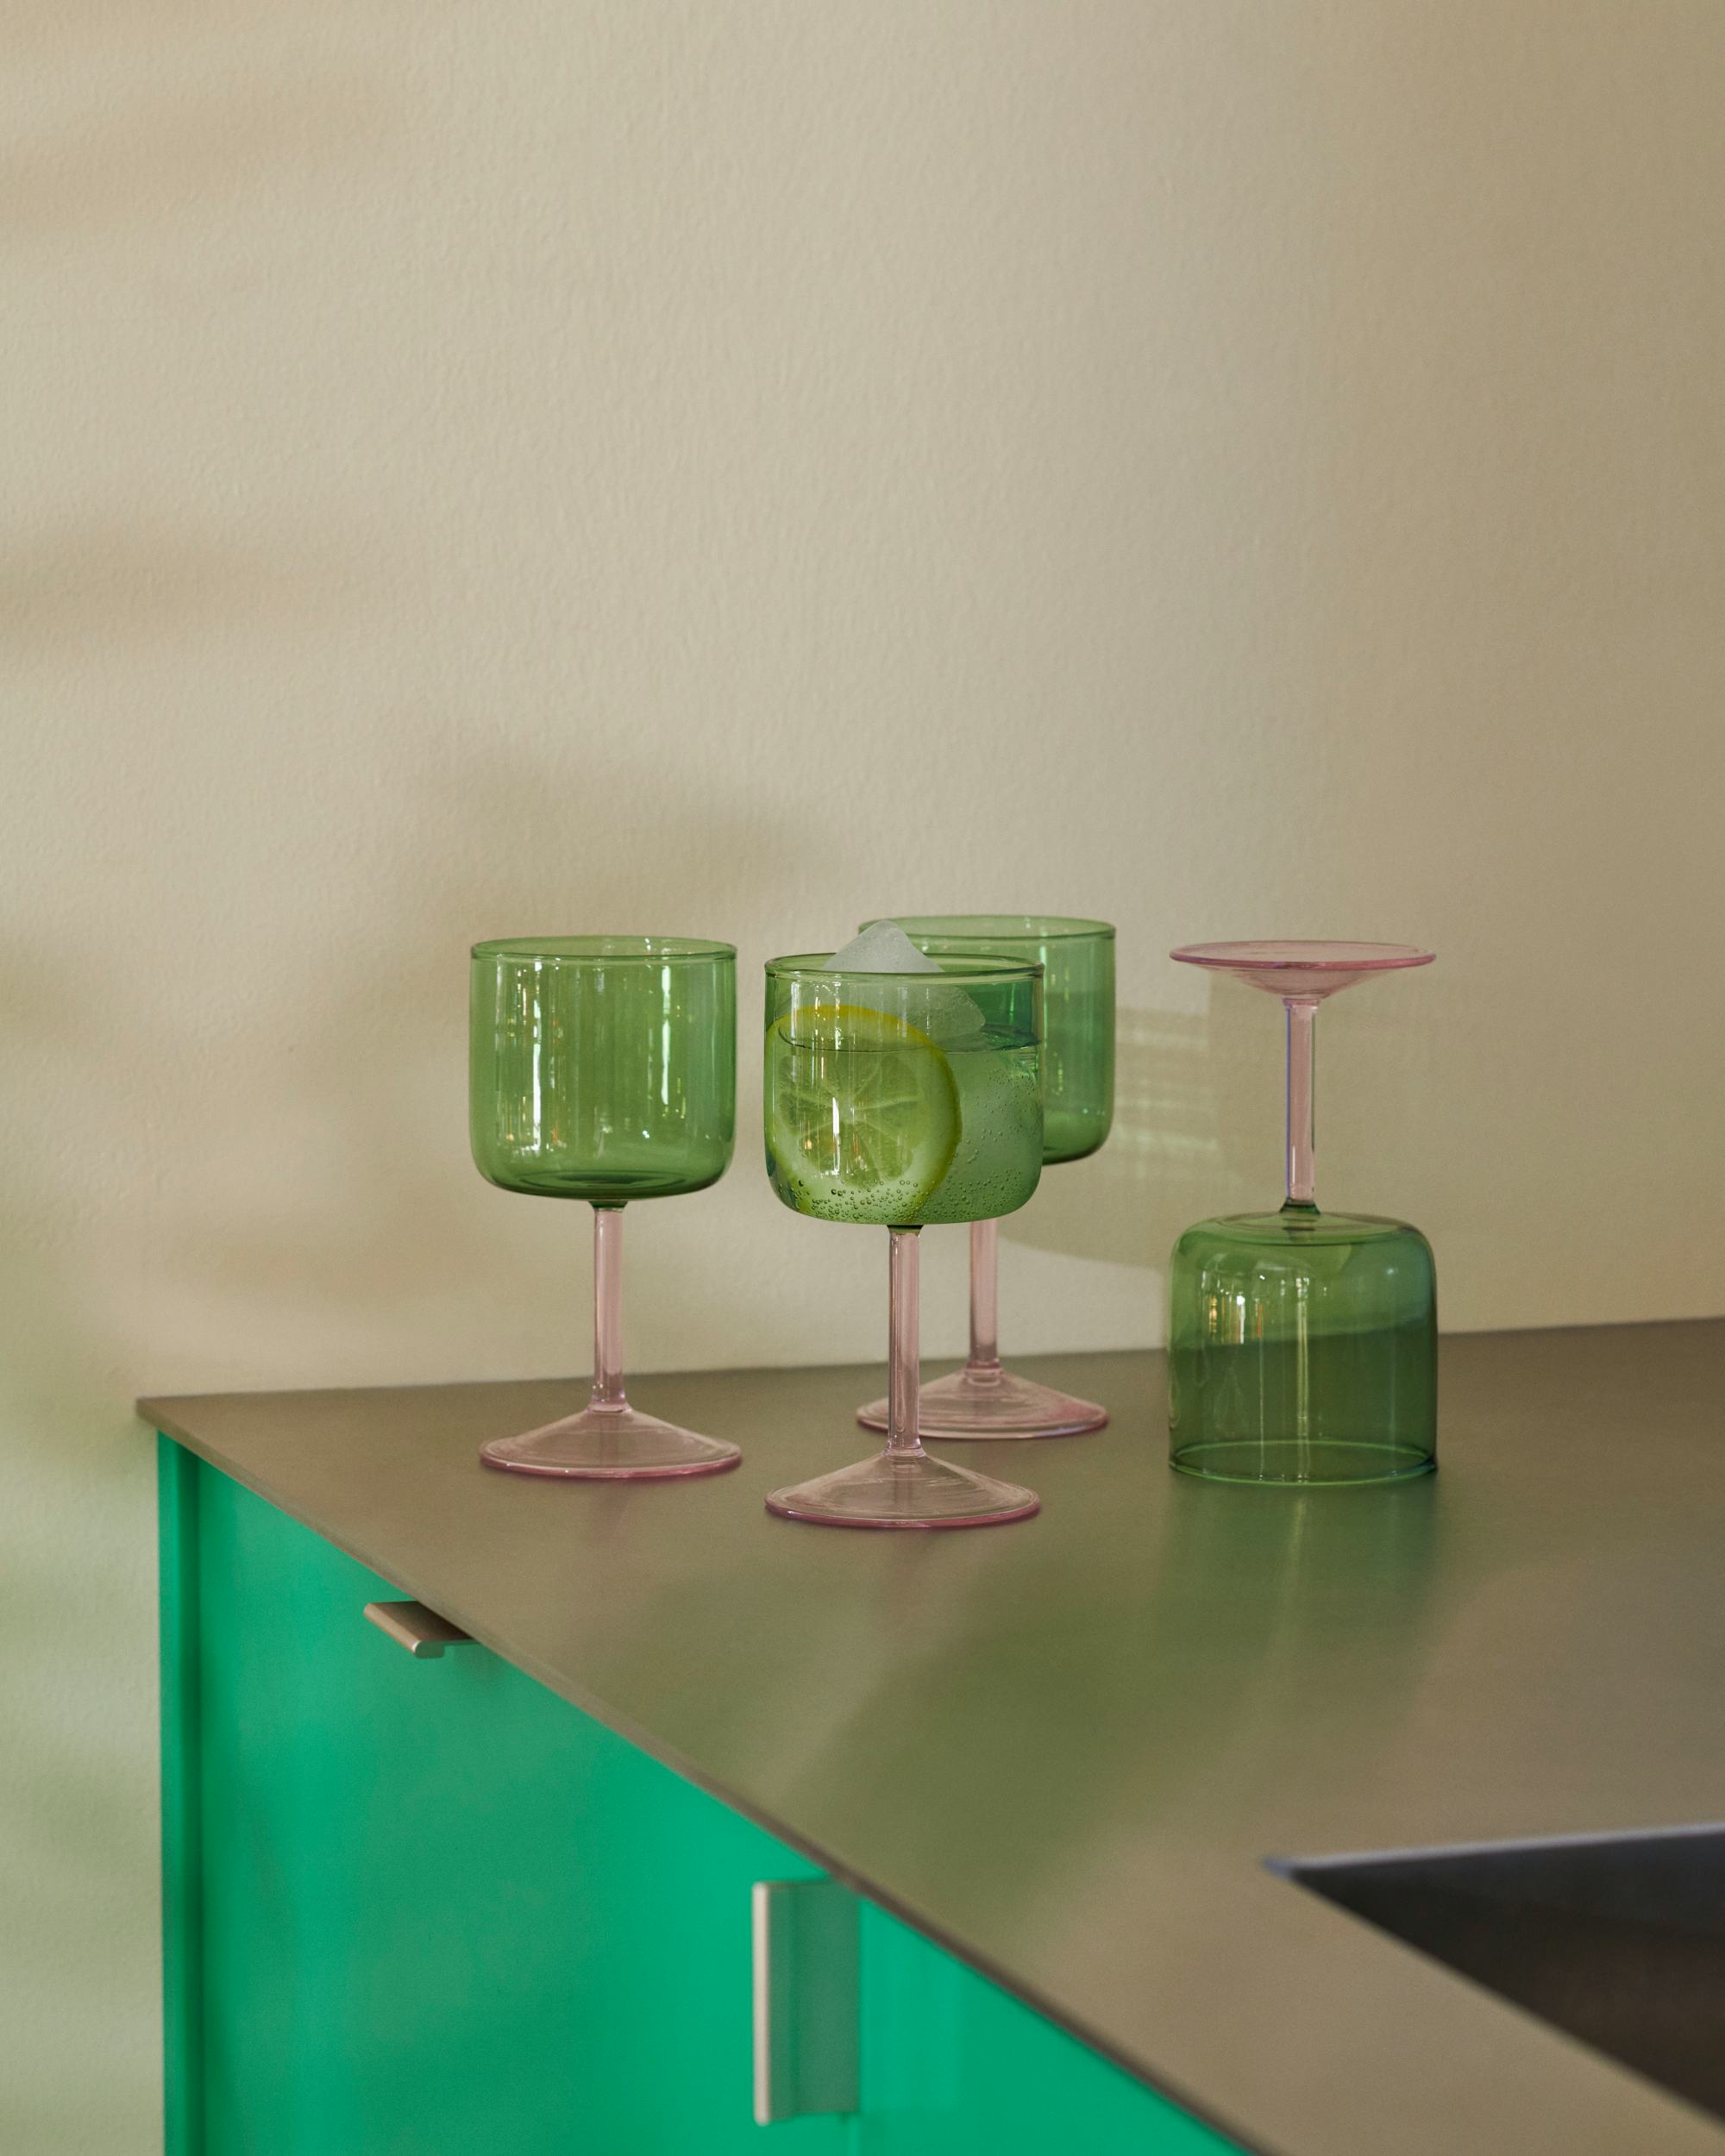 Hay - Tint Wine Glass, Green / Pink (Set of 2)